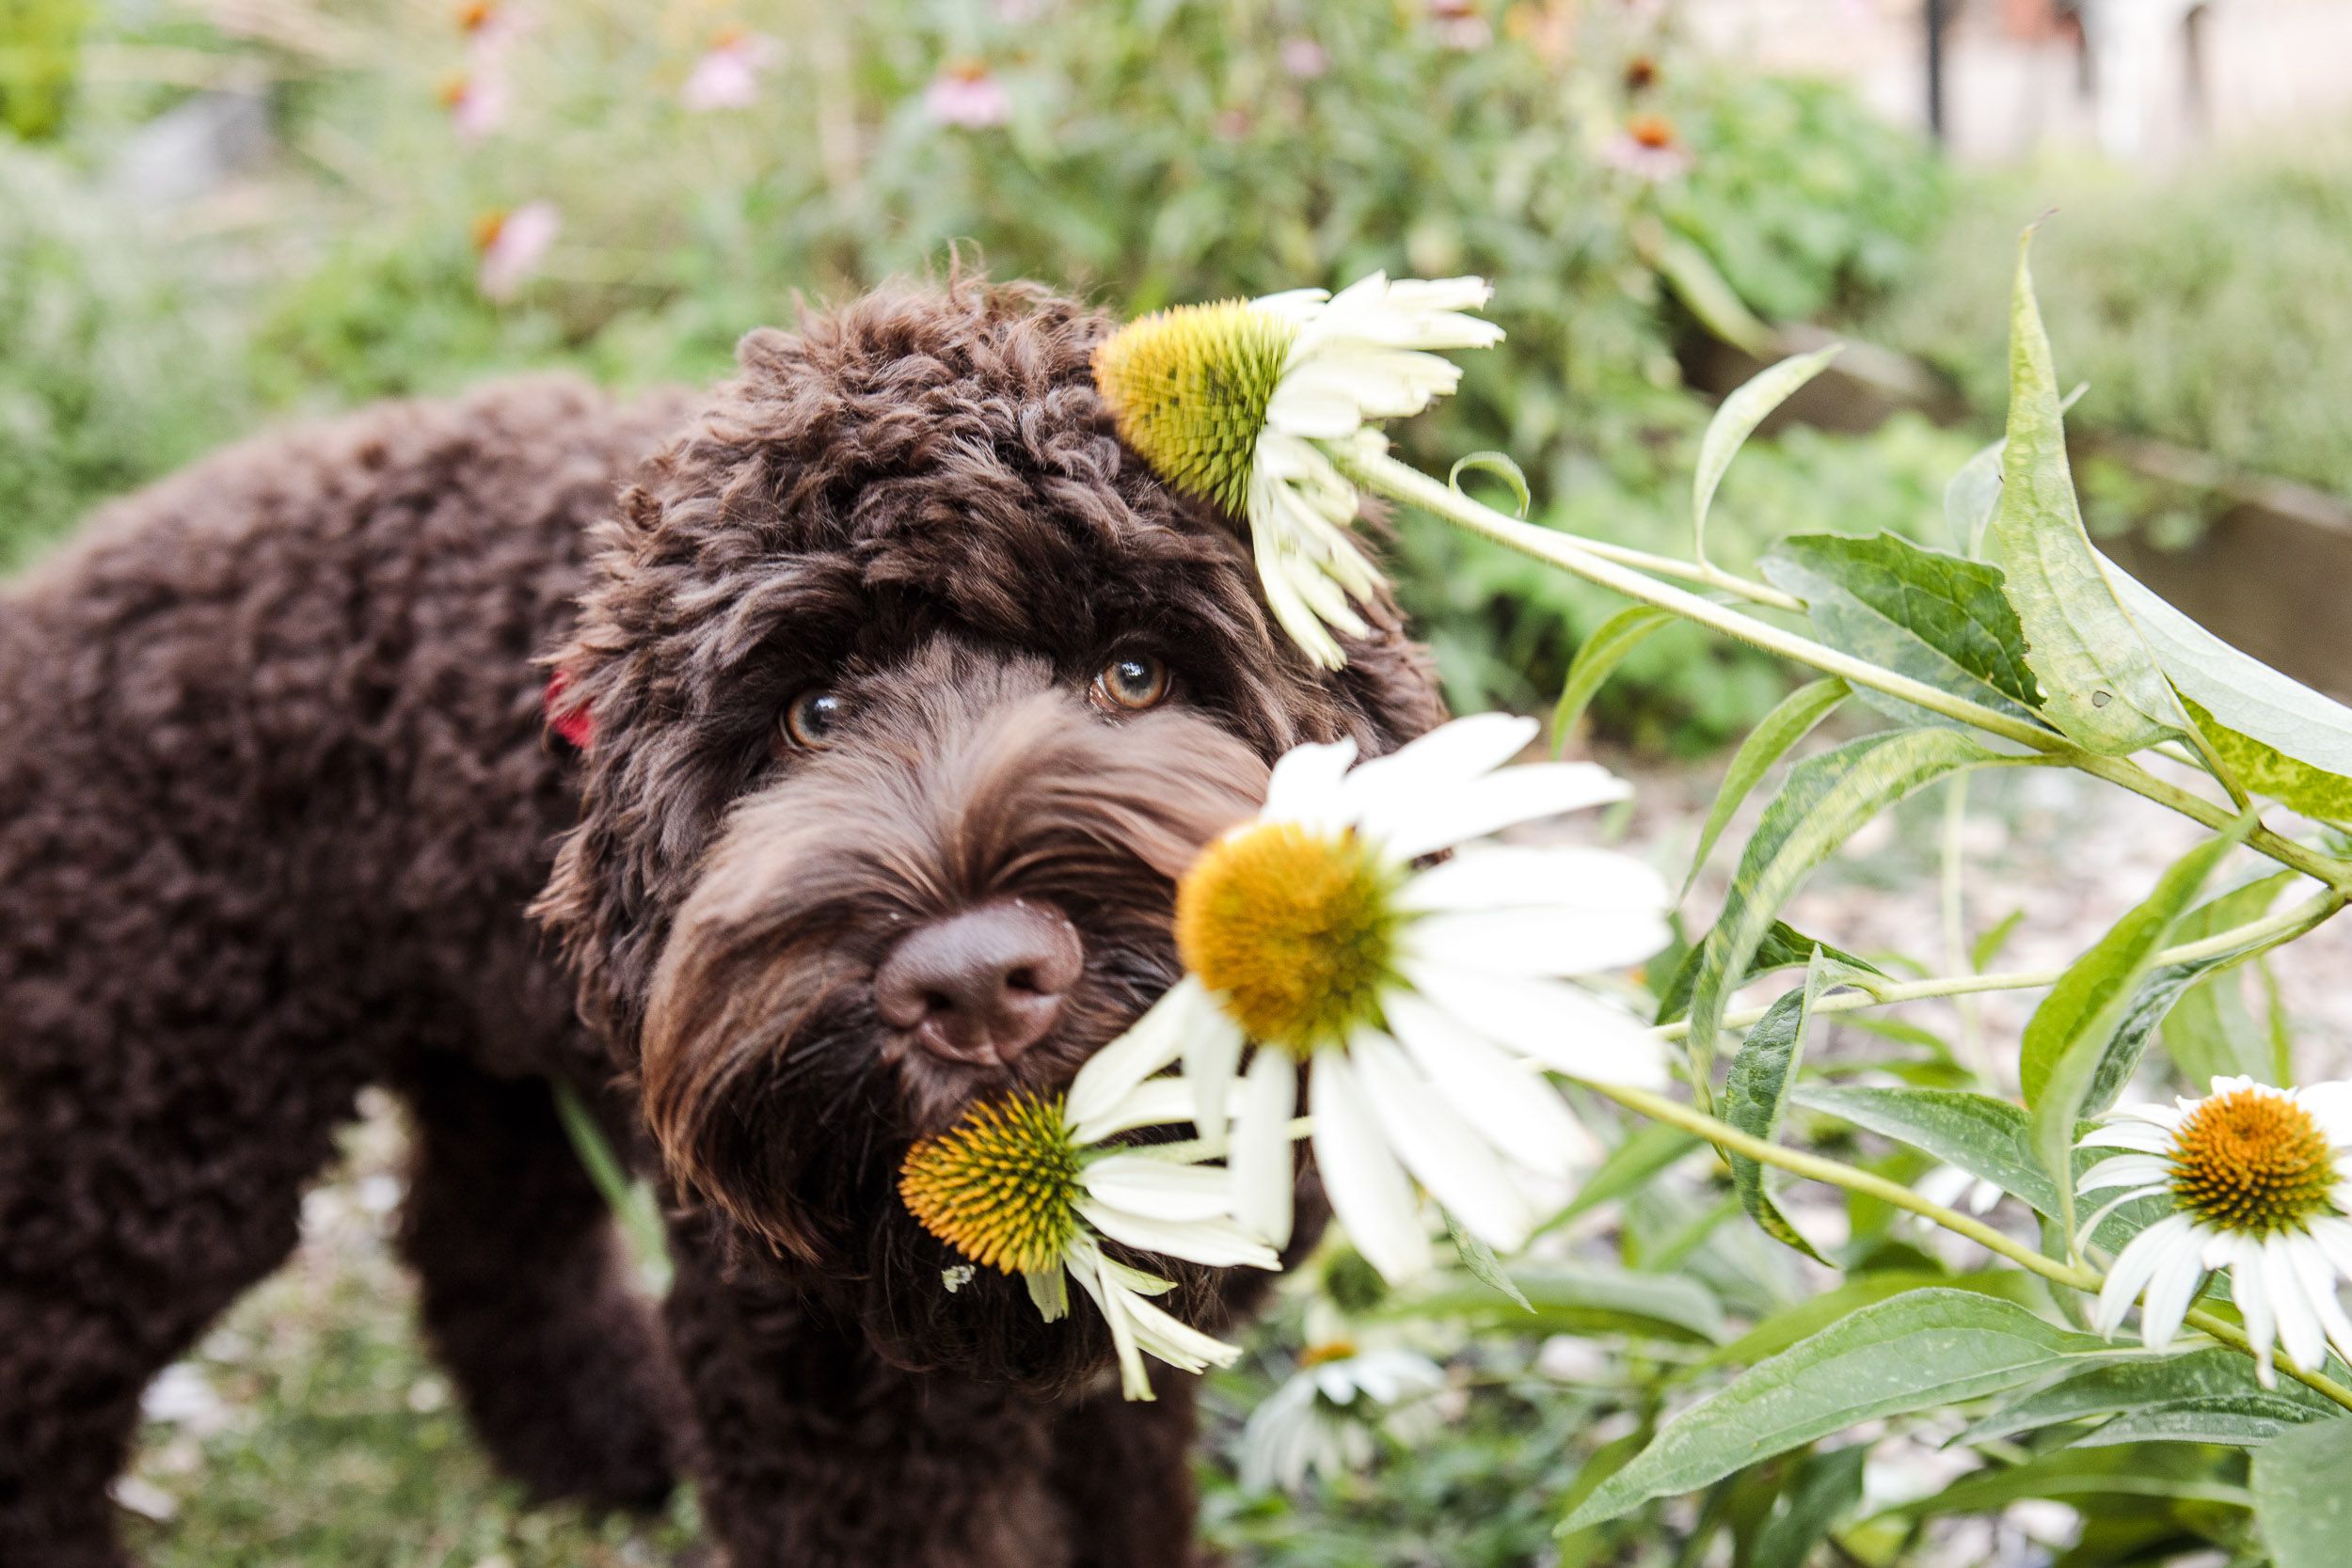 What plants and grasses are toxic to dogs